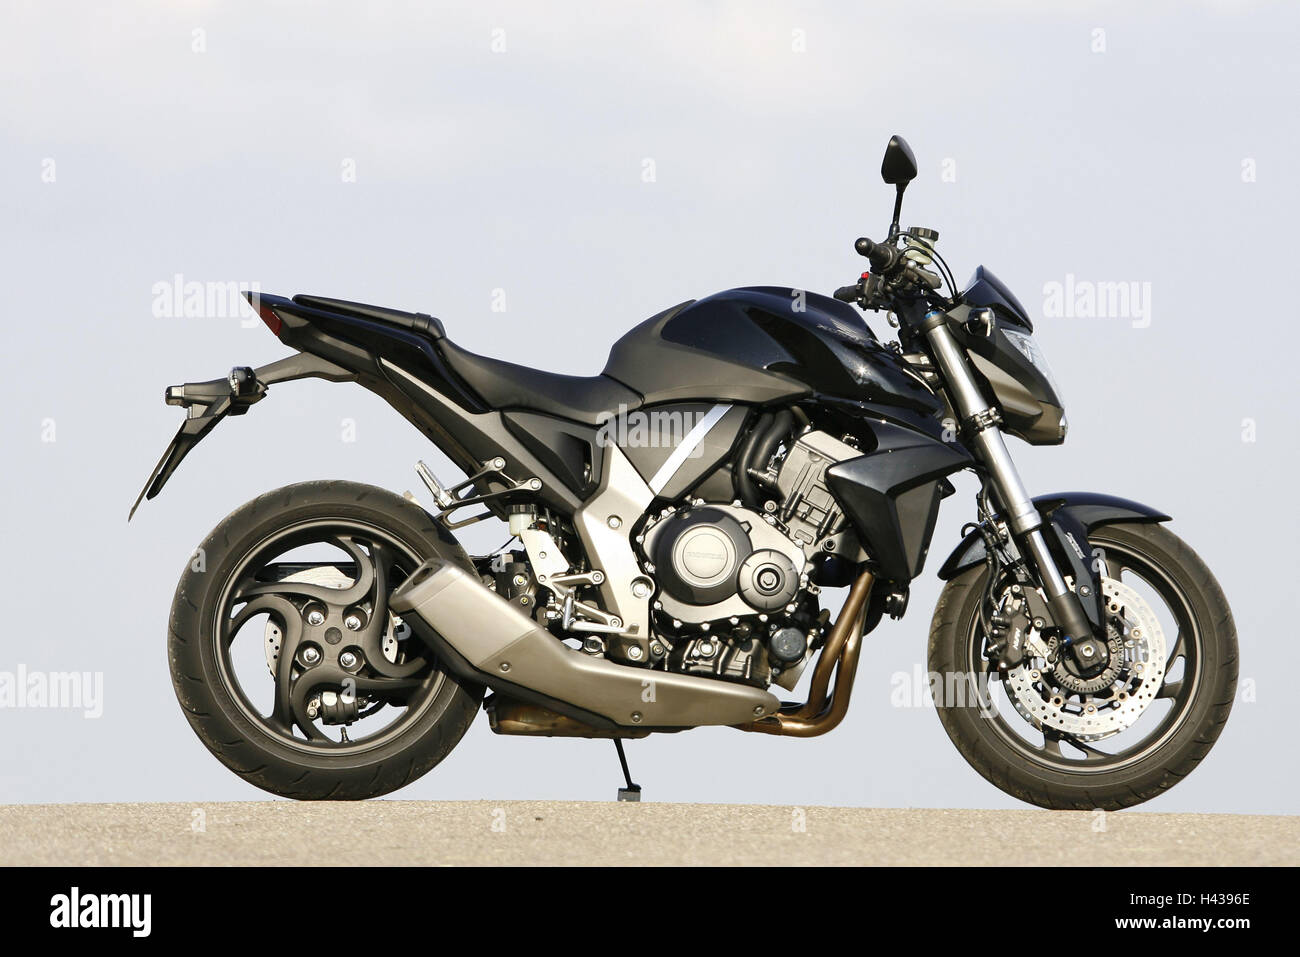 Motorcycle, Honda CB 1000R, side view, two-wheeled vehicle, Honda, cut out, motorcycle driving, leisure time, hobby, speed, design motorcycle, Stock Photo